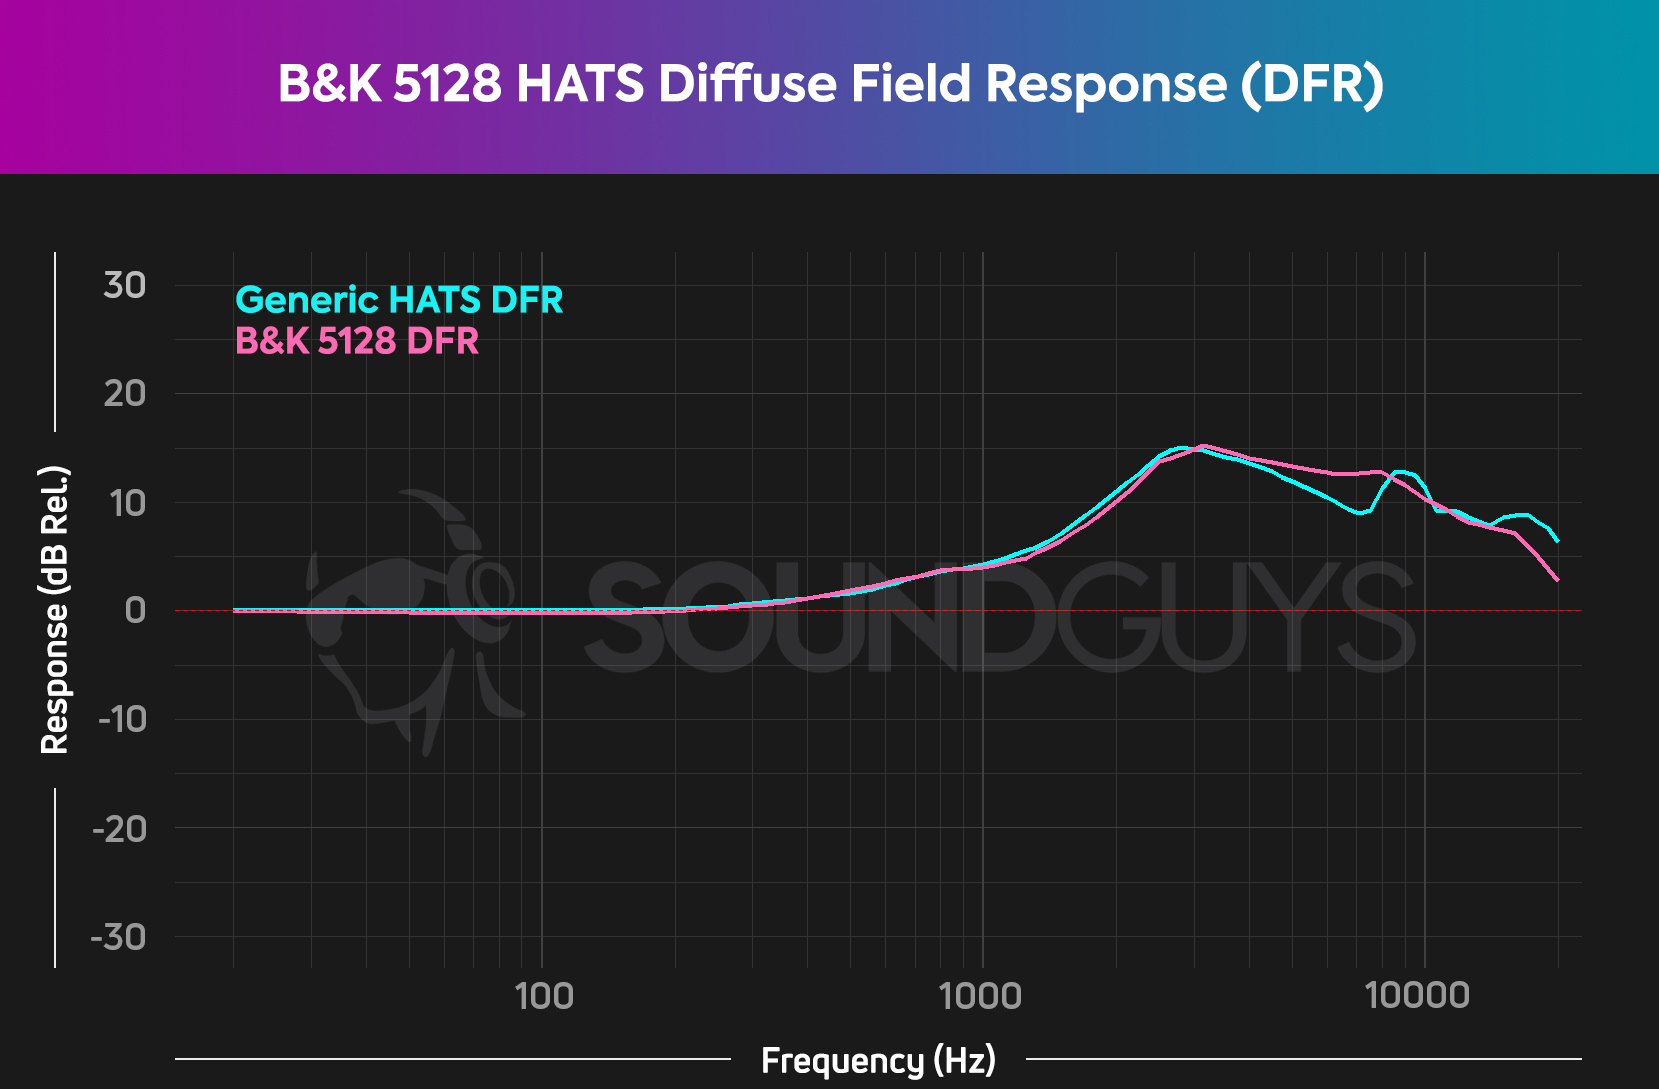 Chart showing the broad boost around 3kHz of the diffuse field response